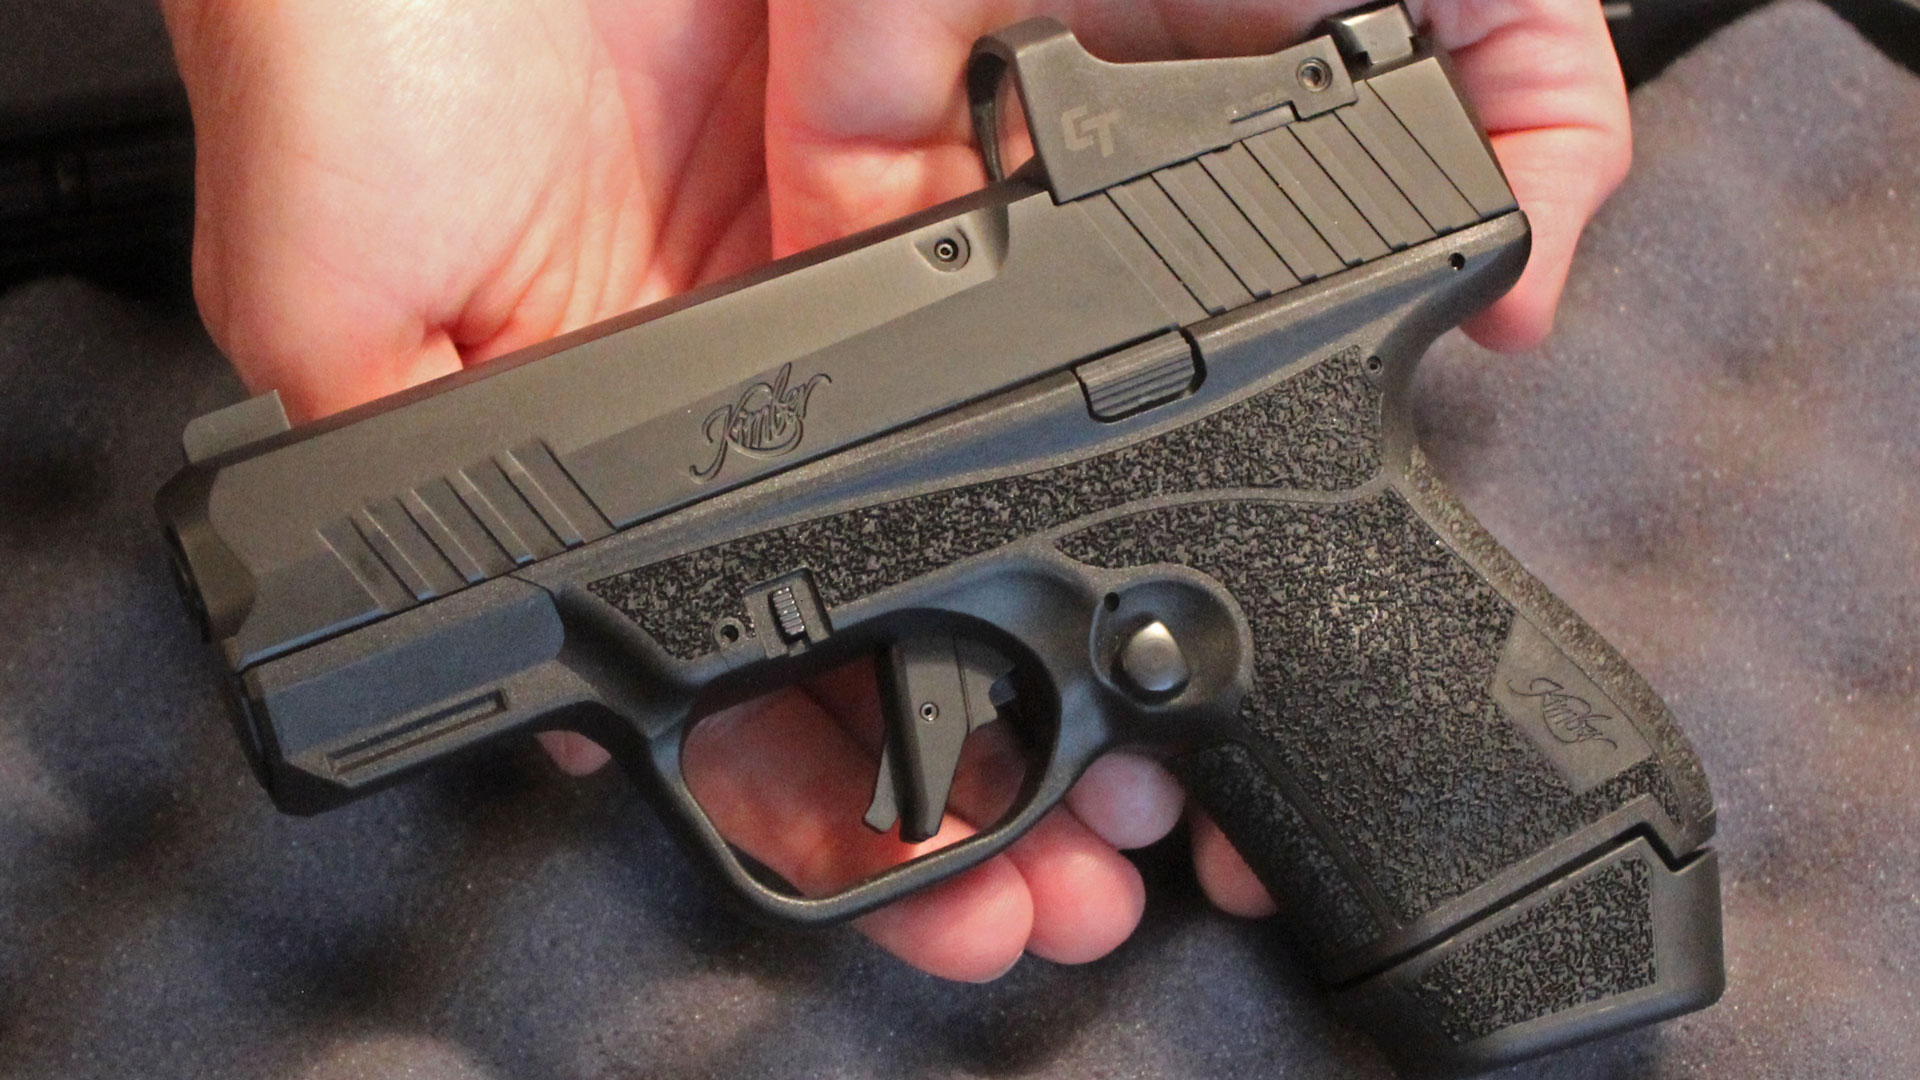 Nra Women 5 Reasons To Check Out The Kimber R7 Mako 9 Mm Pistol